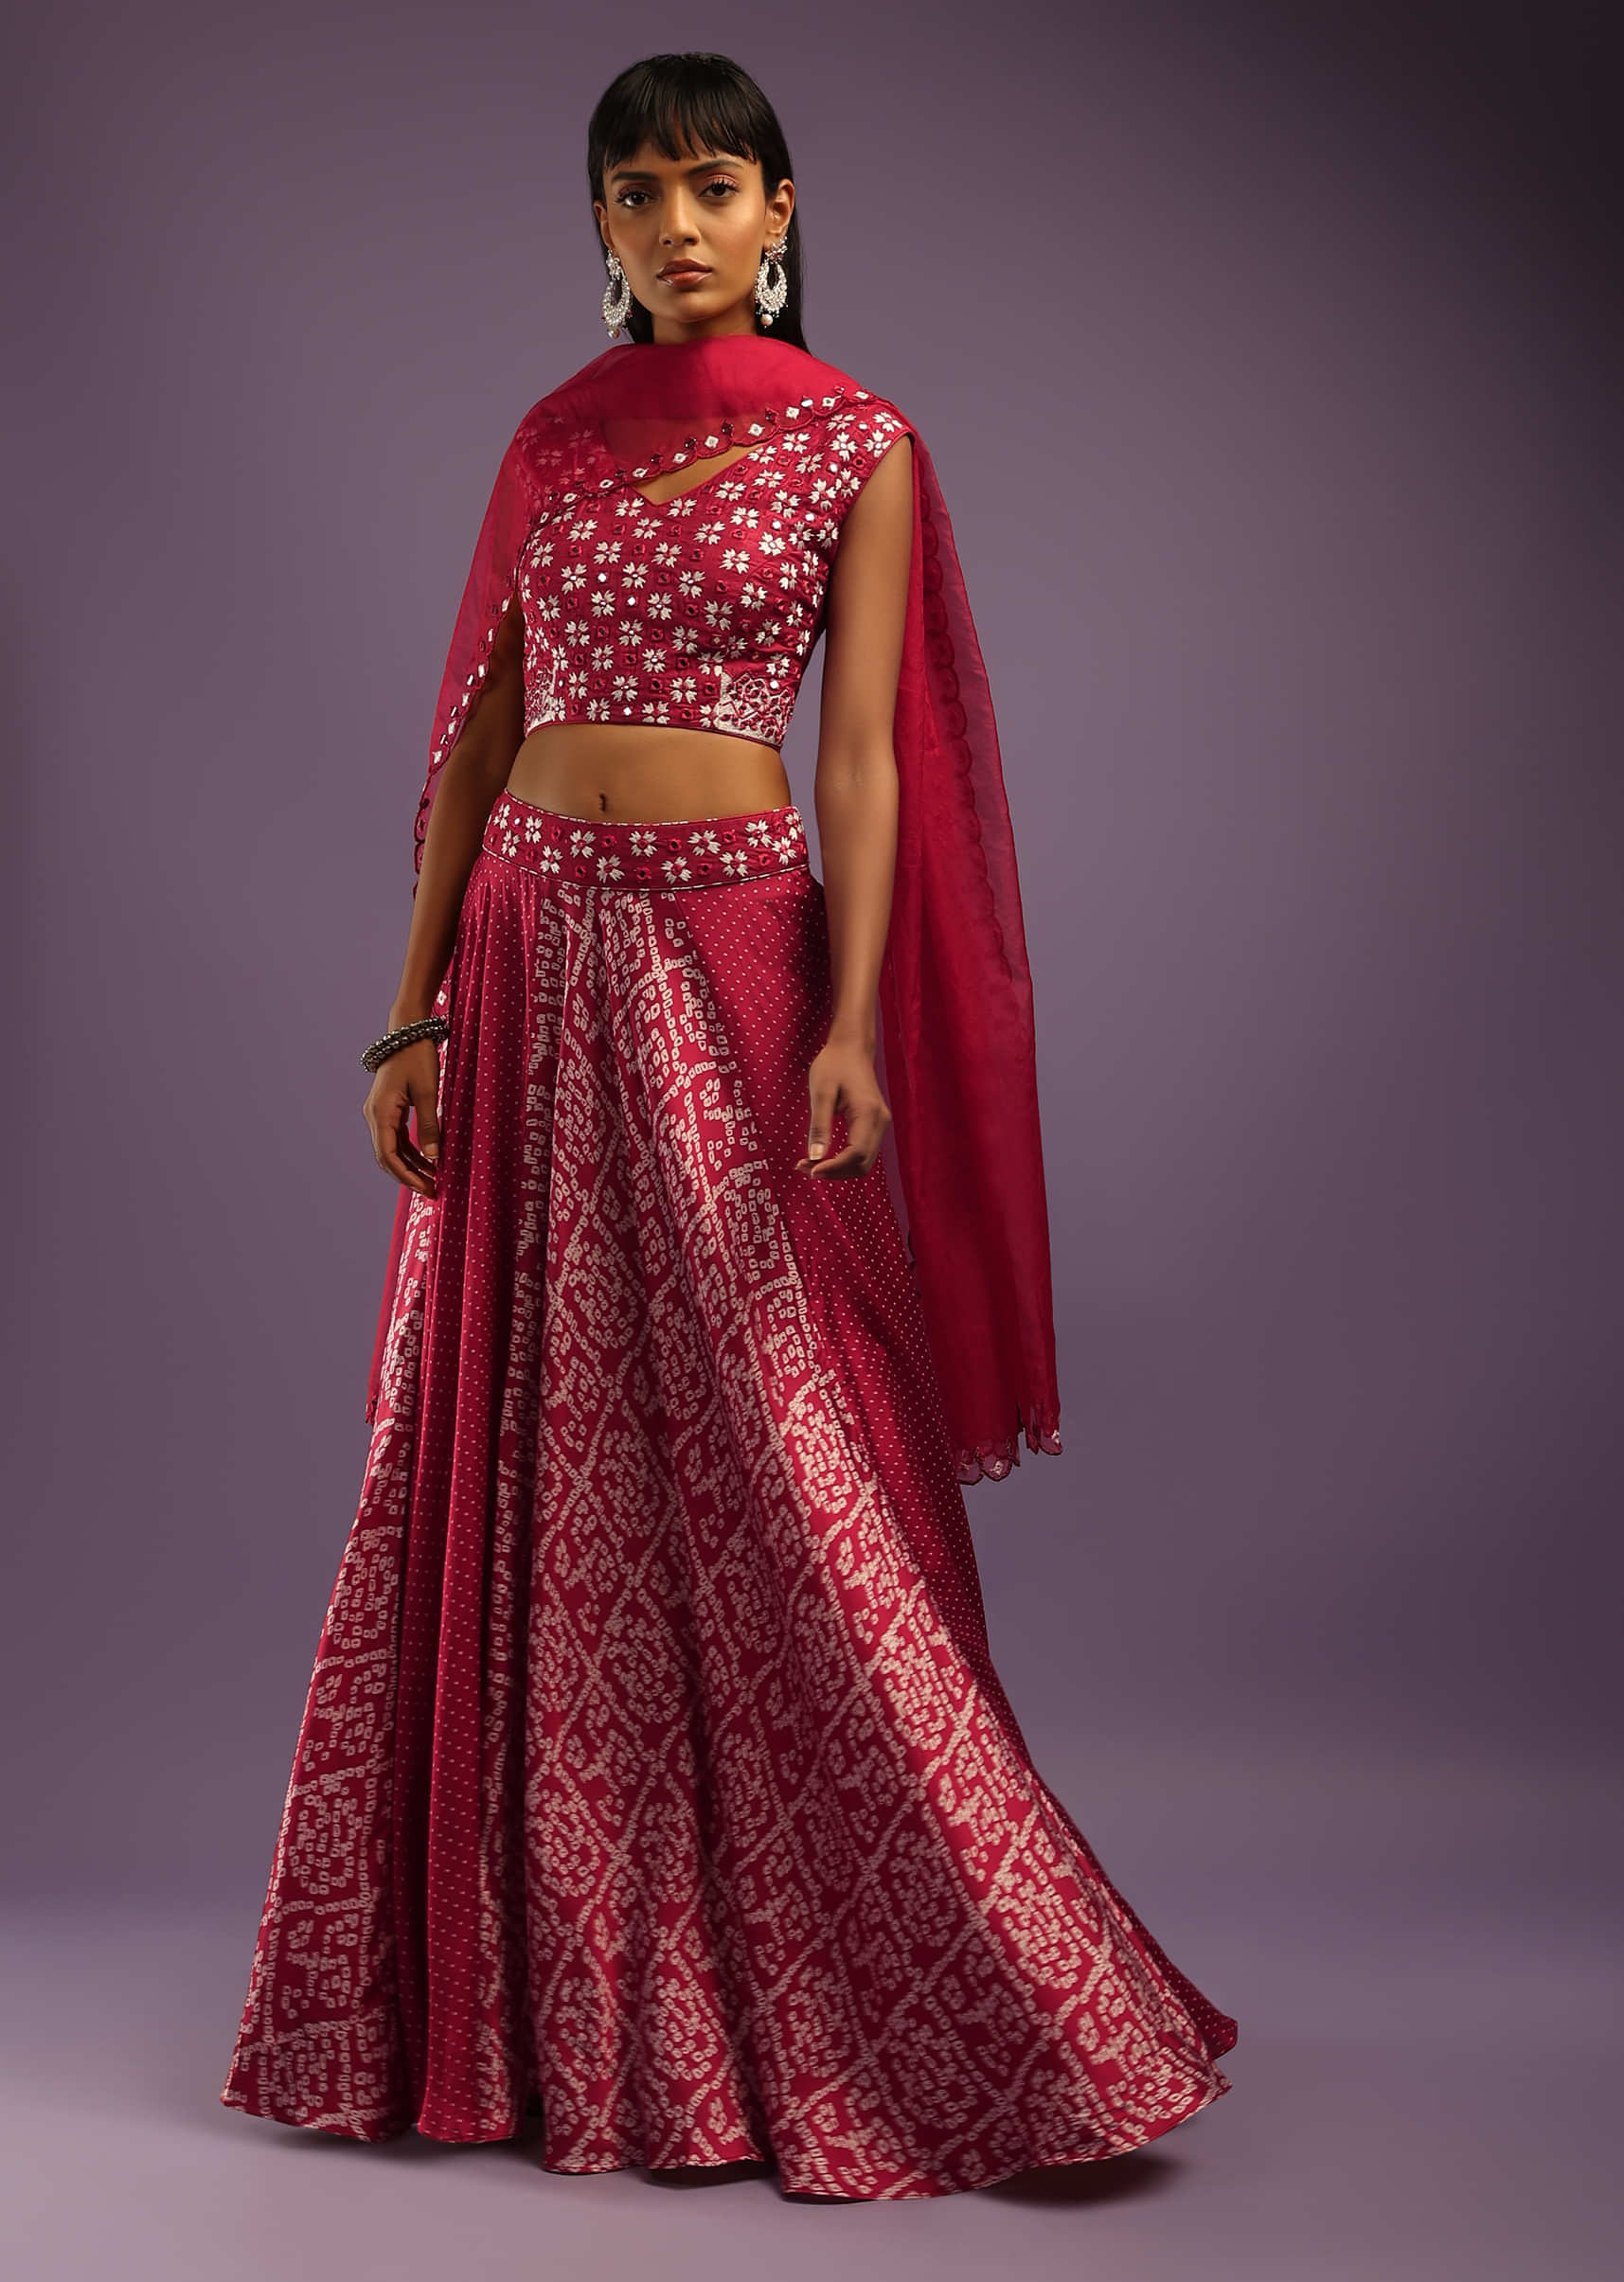 Garnet Red Skirt In Satin Blend With Bandhani Print And Abla Embroidered Crop Top 